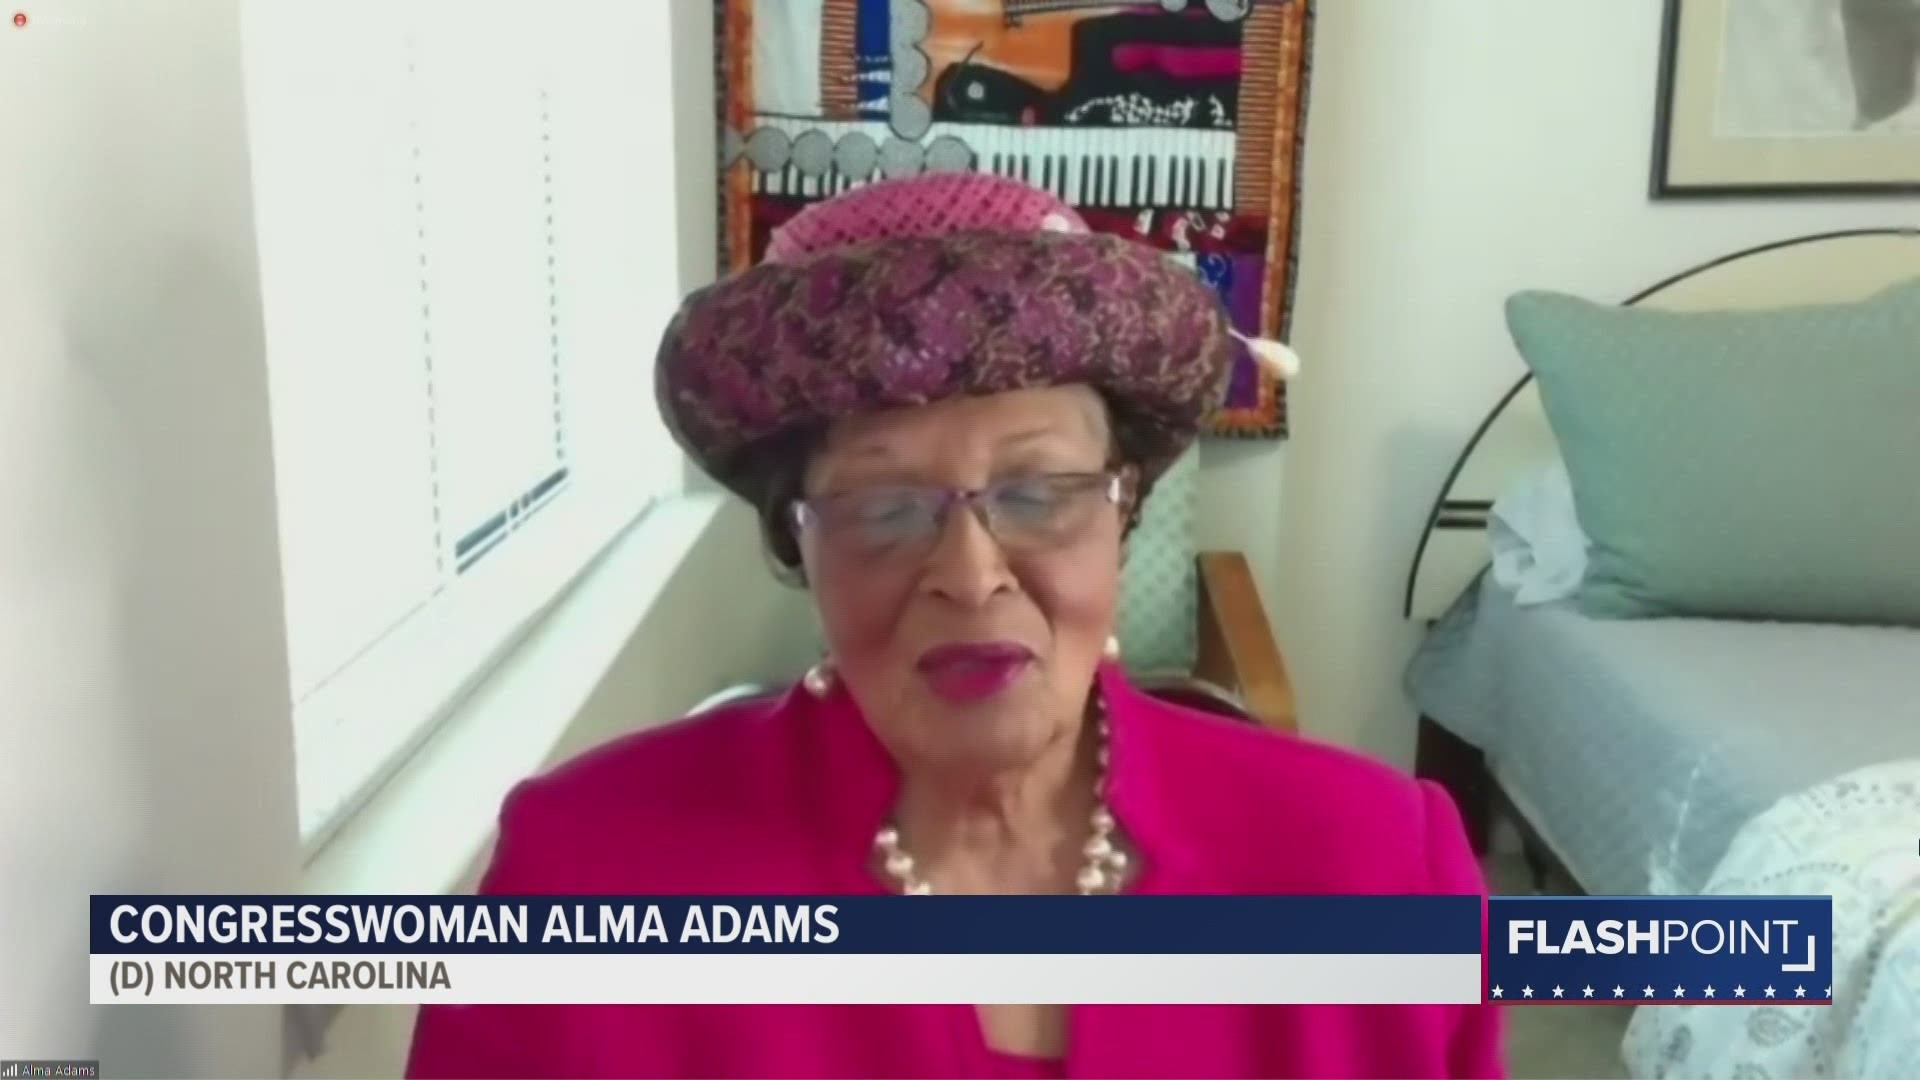 Ben Thompson learns how U.S. Rep. Alma Adams hopes to bring more racial equity in maternal healthcare.